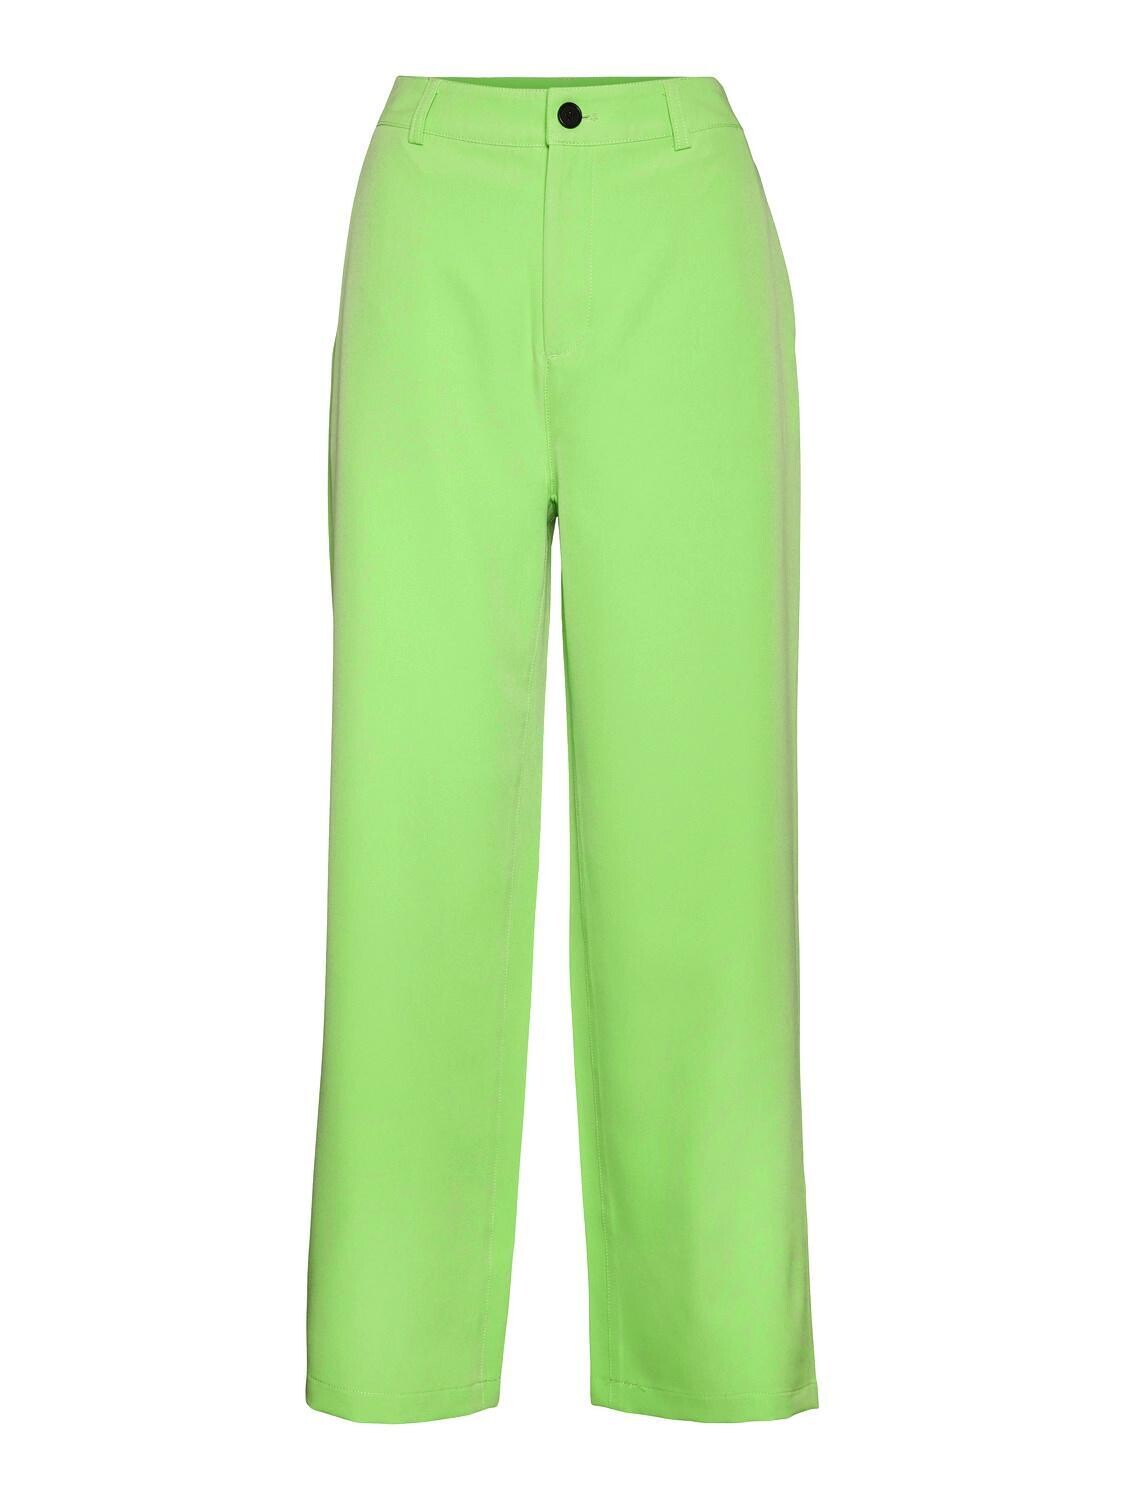 NMDREWIE HW ANCLE WIDE PANTS Grass Green-DTM LINING